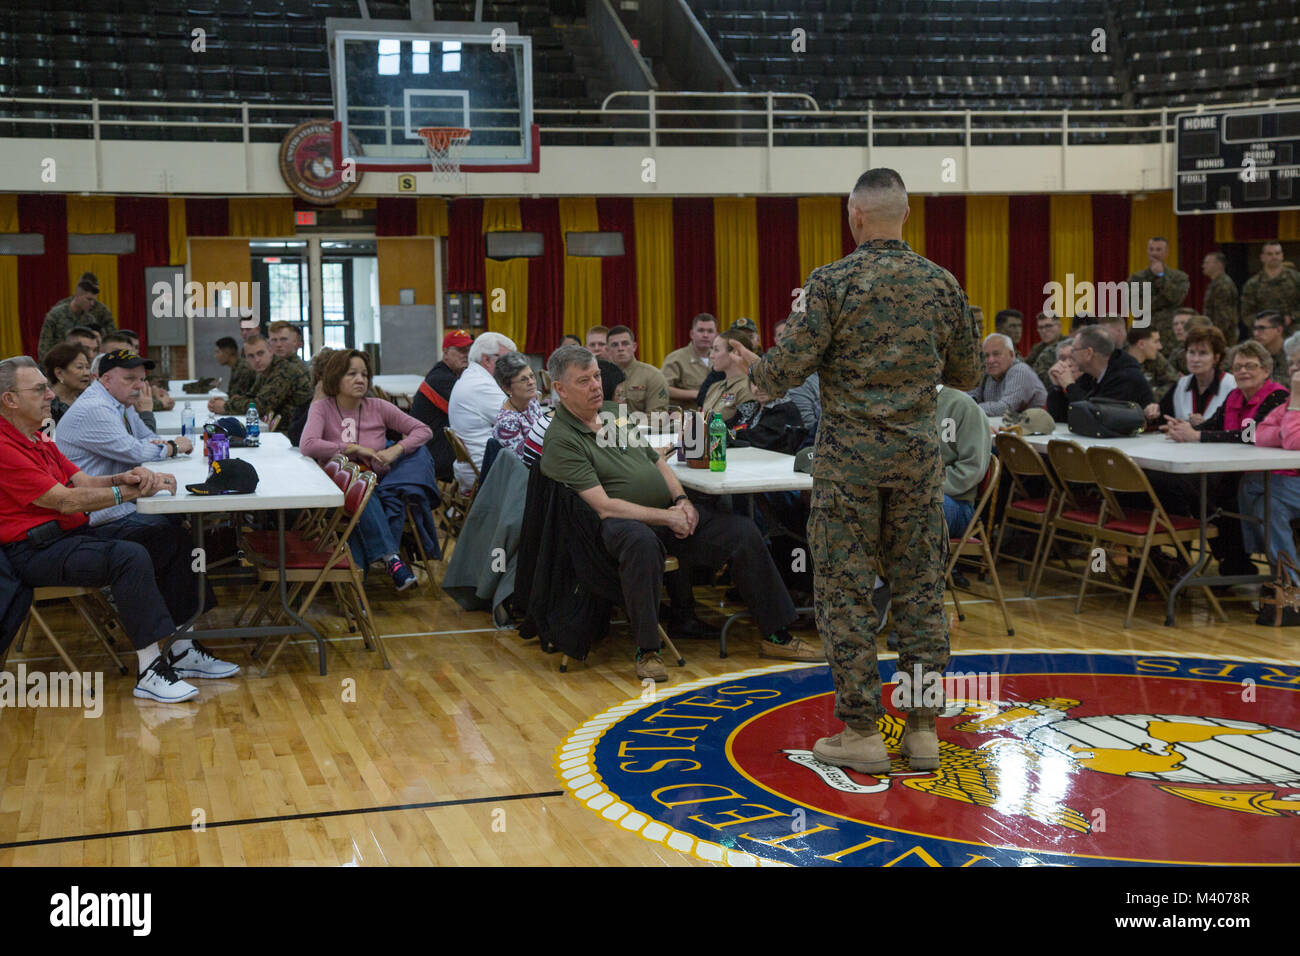 U.S. Marine Corps Maj. Gen. John K. Love, commanding general, 2nd Marine Division (2d MARDIV), welcomes members of the Second Marine Division Association (SMDA) on Camp Lejeune, N.C., Feb. 7, 2018. SMDA is aboard Camp Lejeune to observe and celebrate the Division’s 77th birthday. (U.S. Marine Corps photo by Lance Cpl. Taylor N. Cooper) Stock Photo